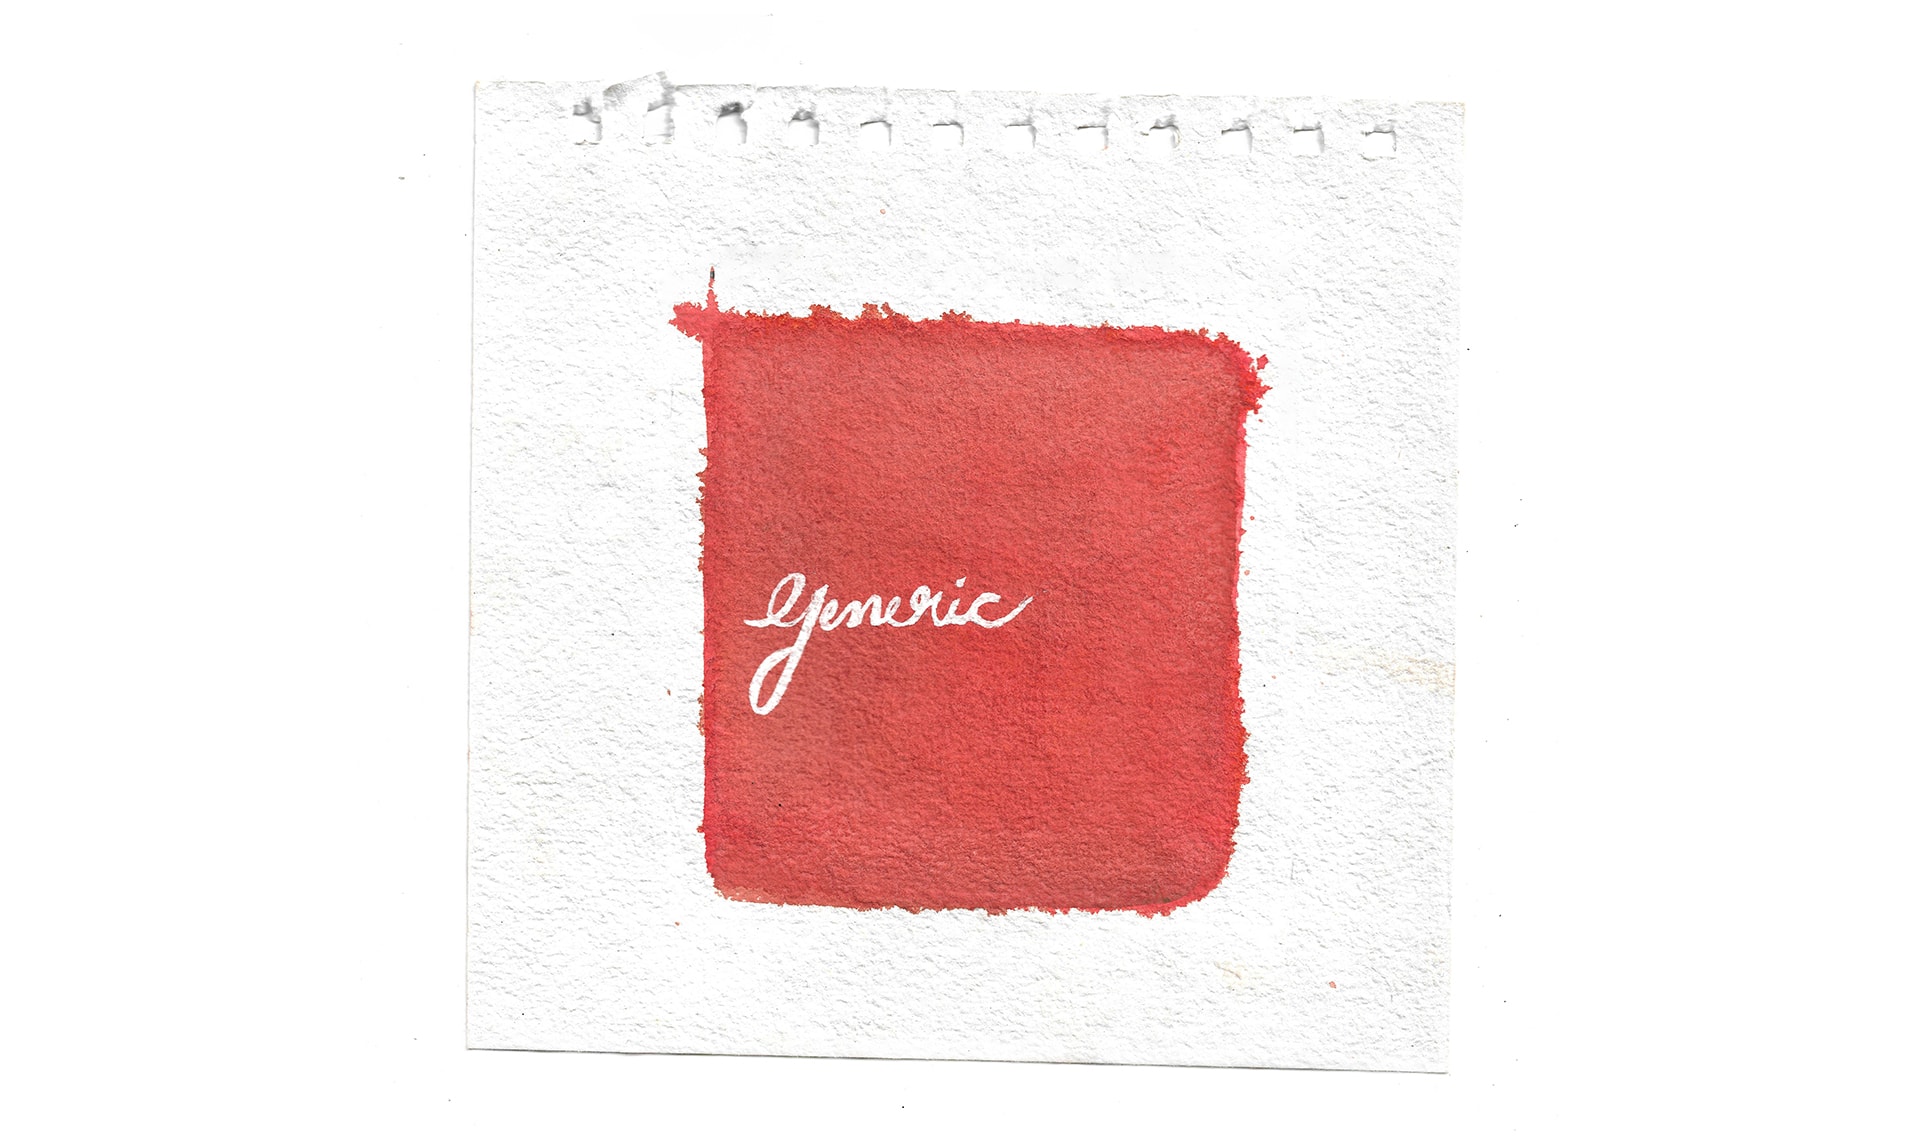 Artwork of a red colored patch with 'Generic' written on it | Artwork by Hiran Madiya